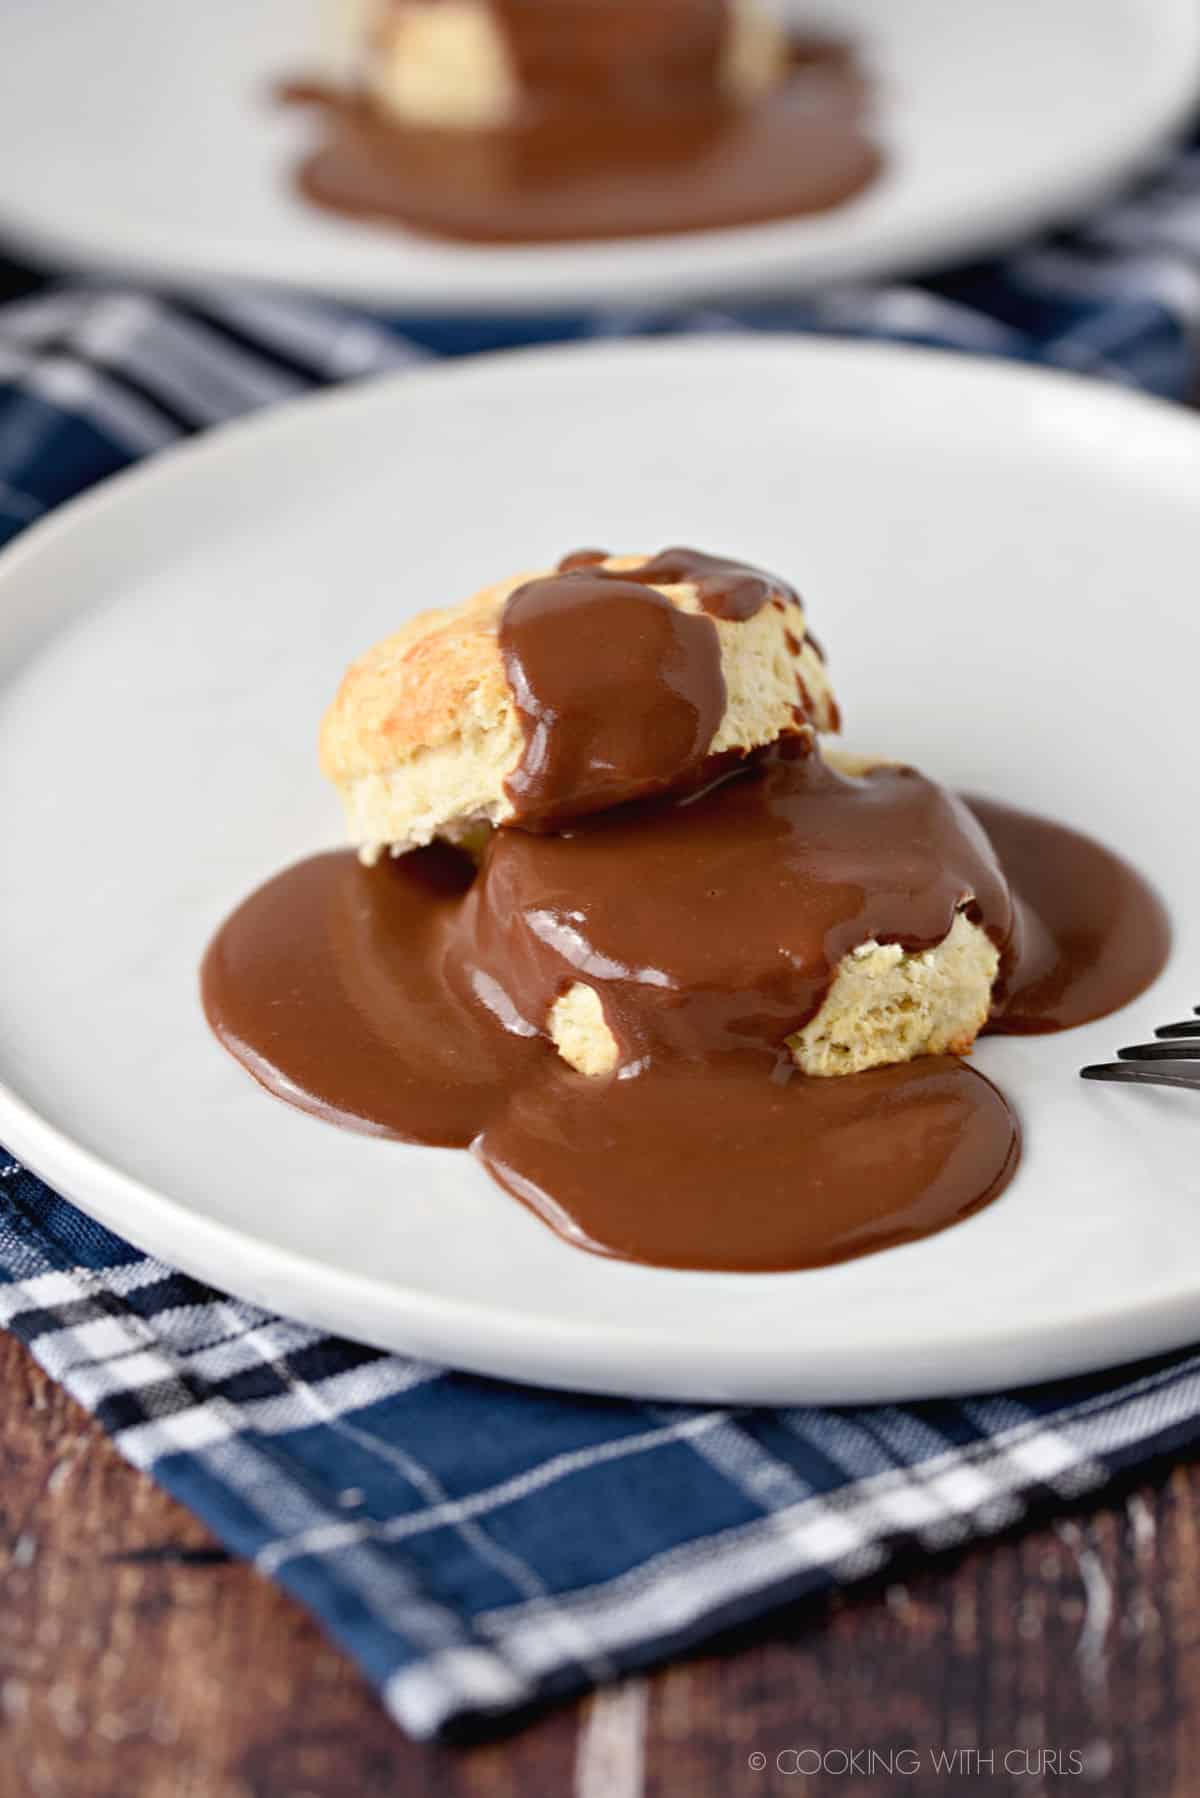 Rich, Chocolate Gravy poured over hot, Homemade Buttermilk Biscuits for a delicious breakfast treat.